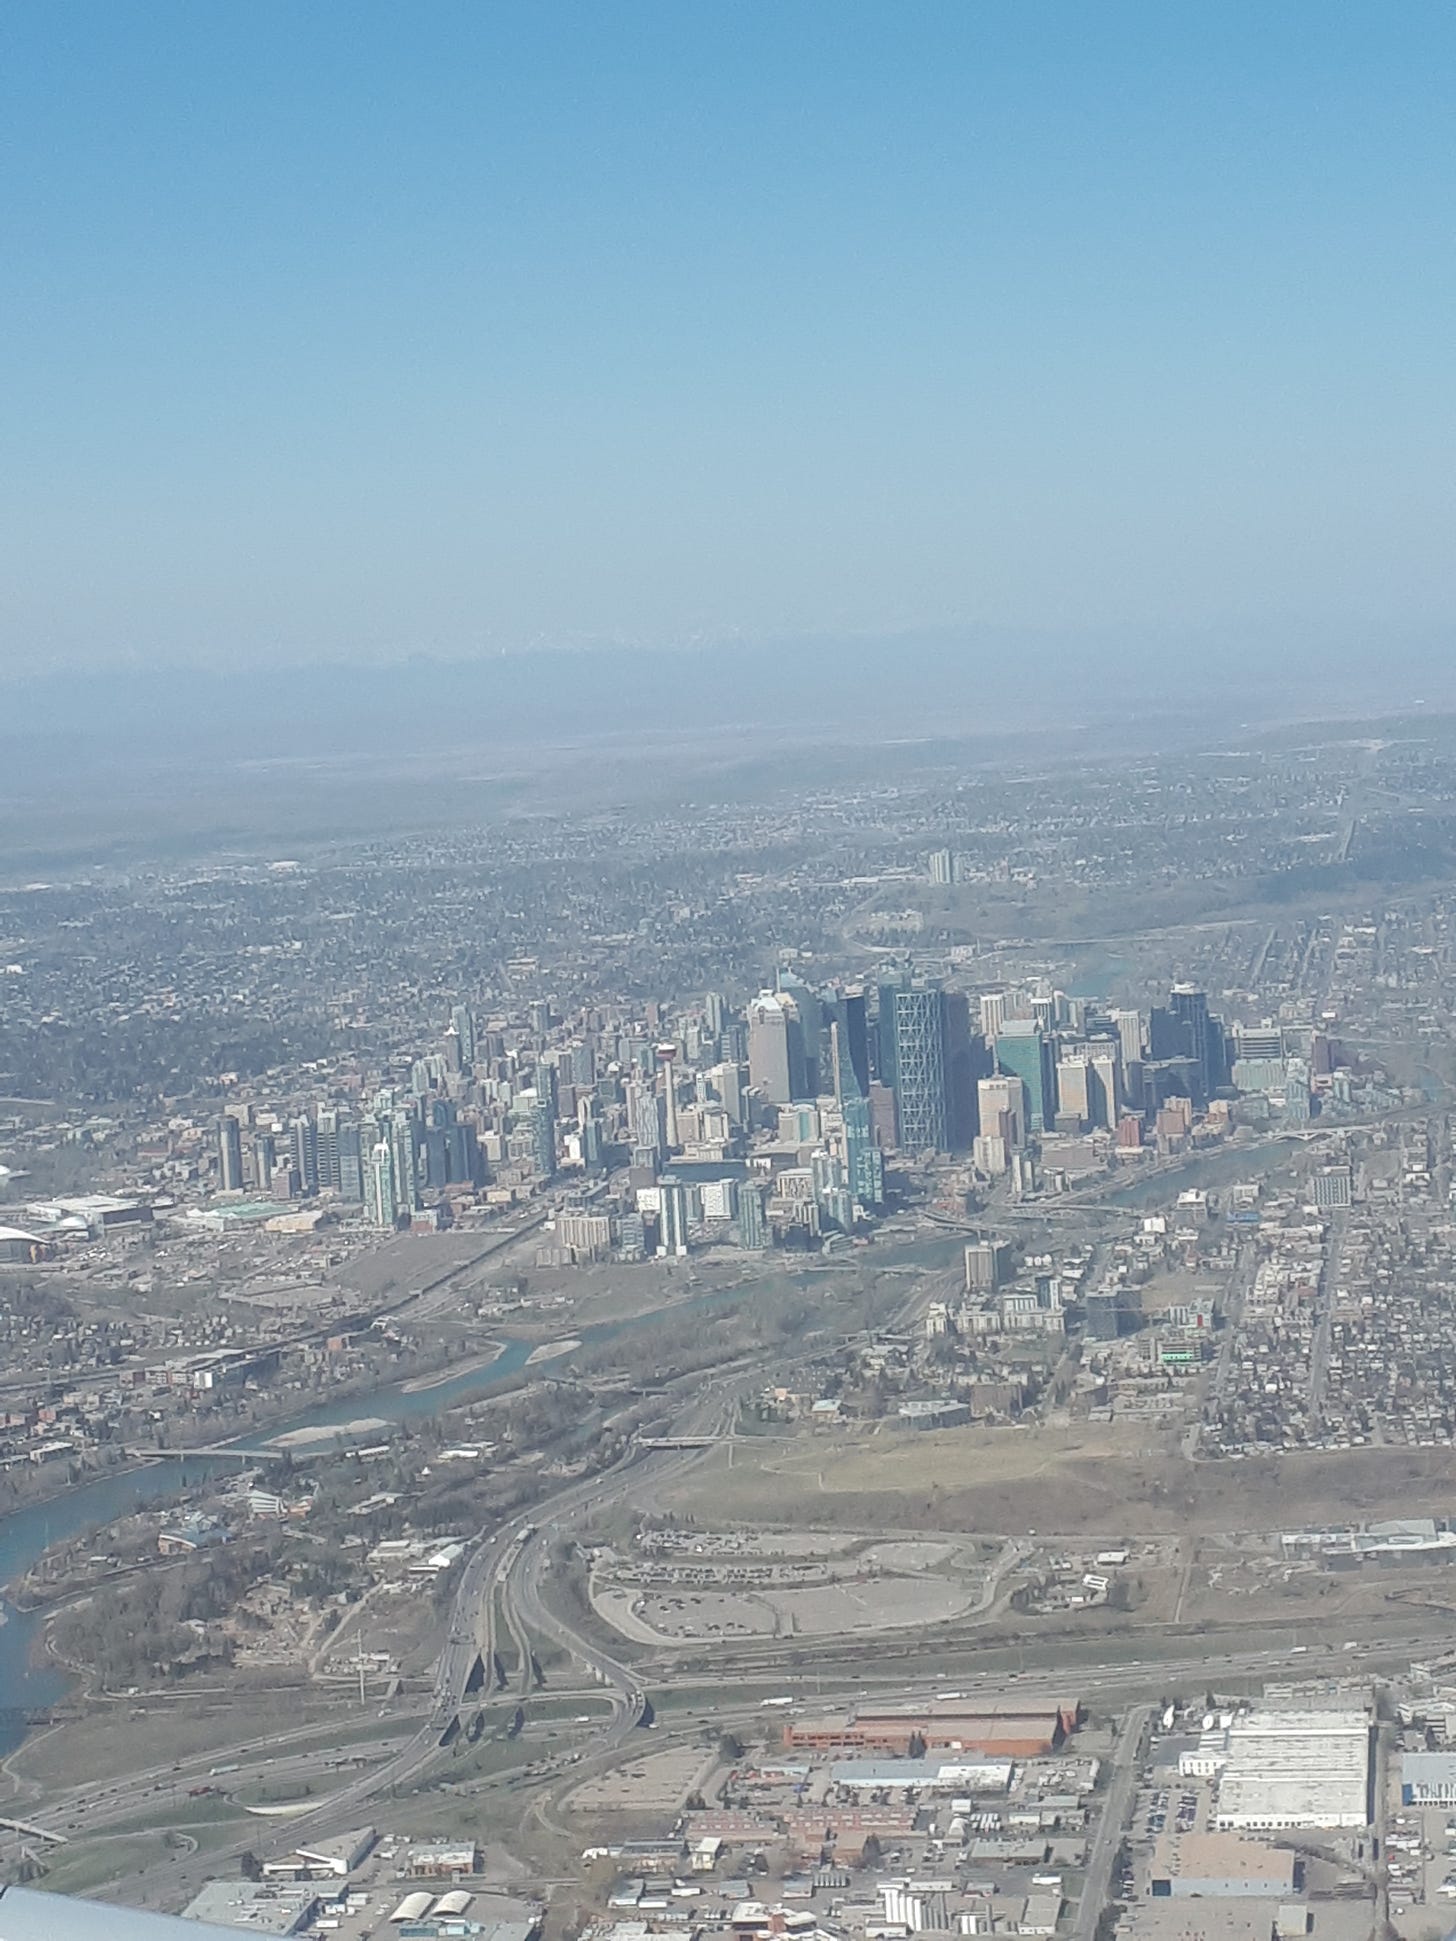 Aerial view of Calgary taken from an airplane window.